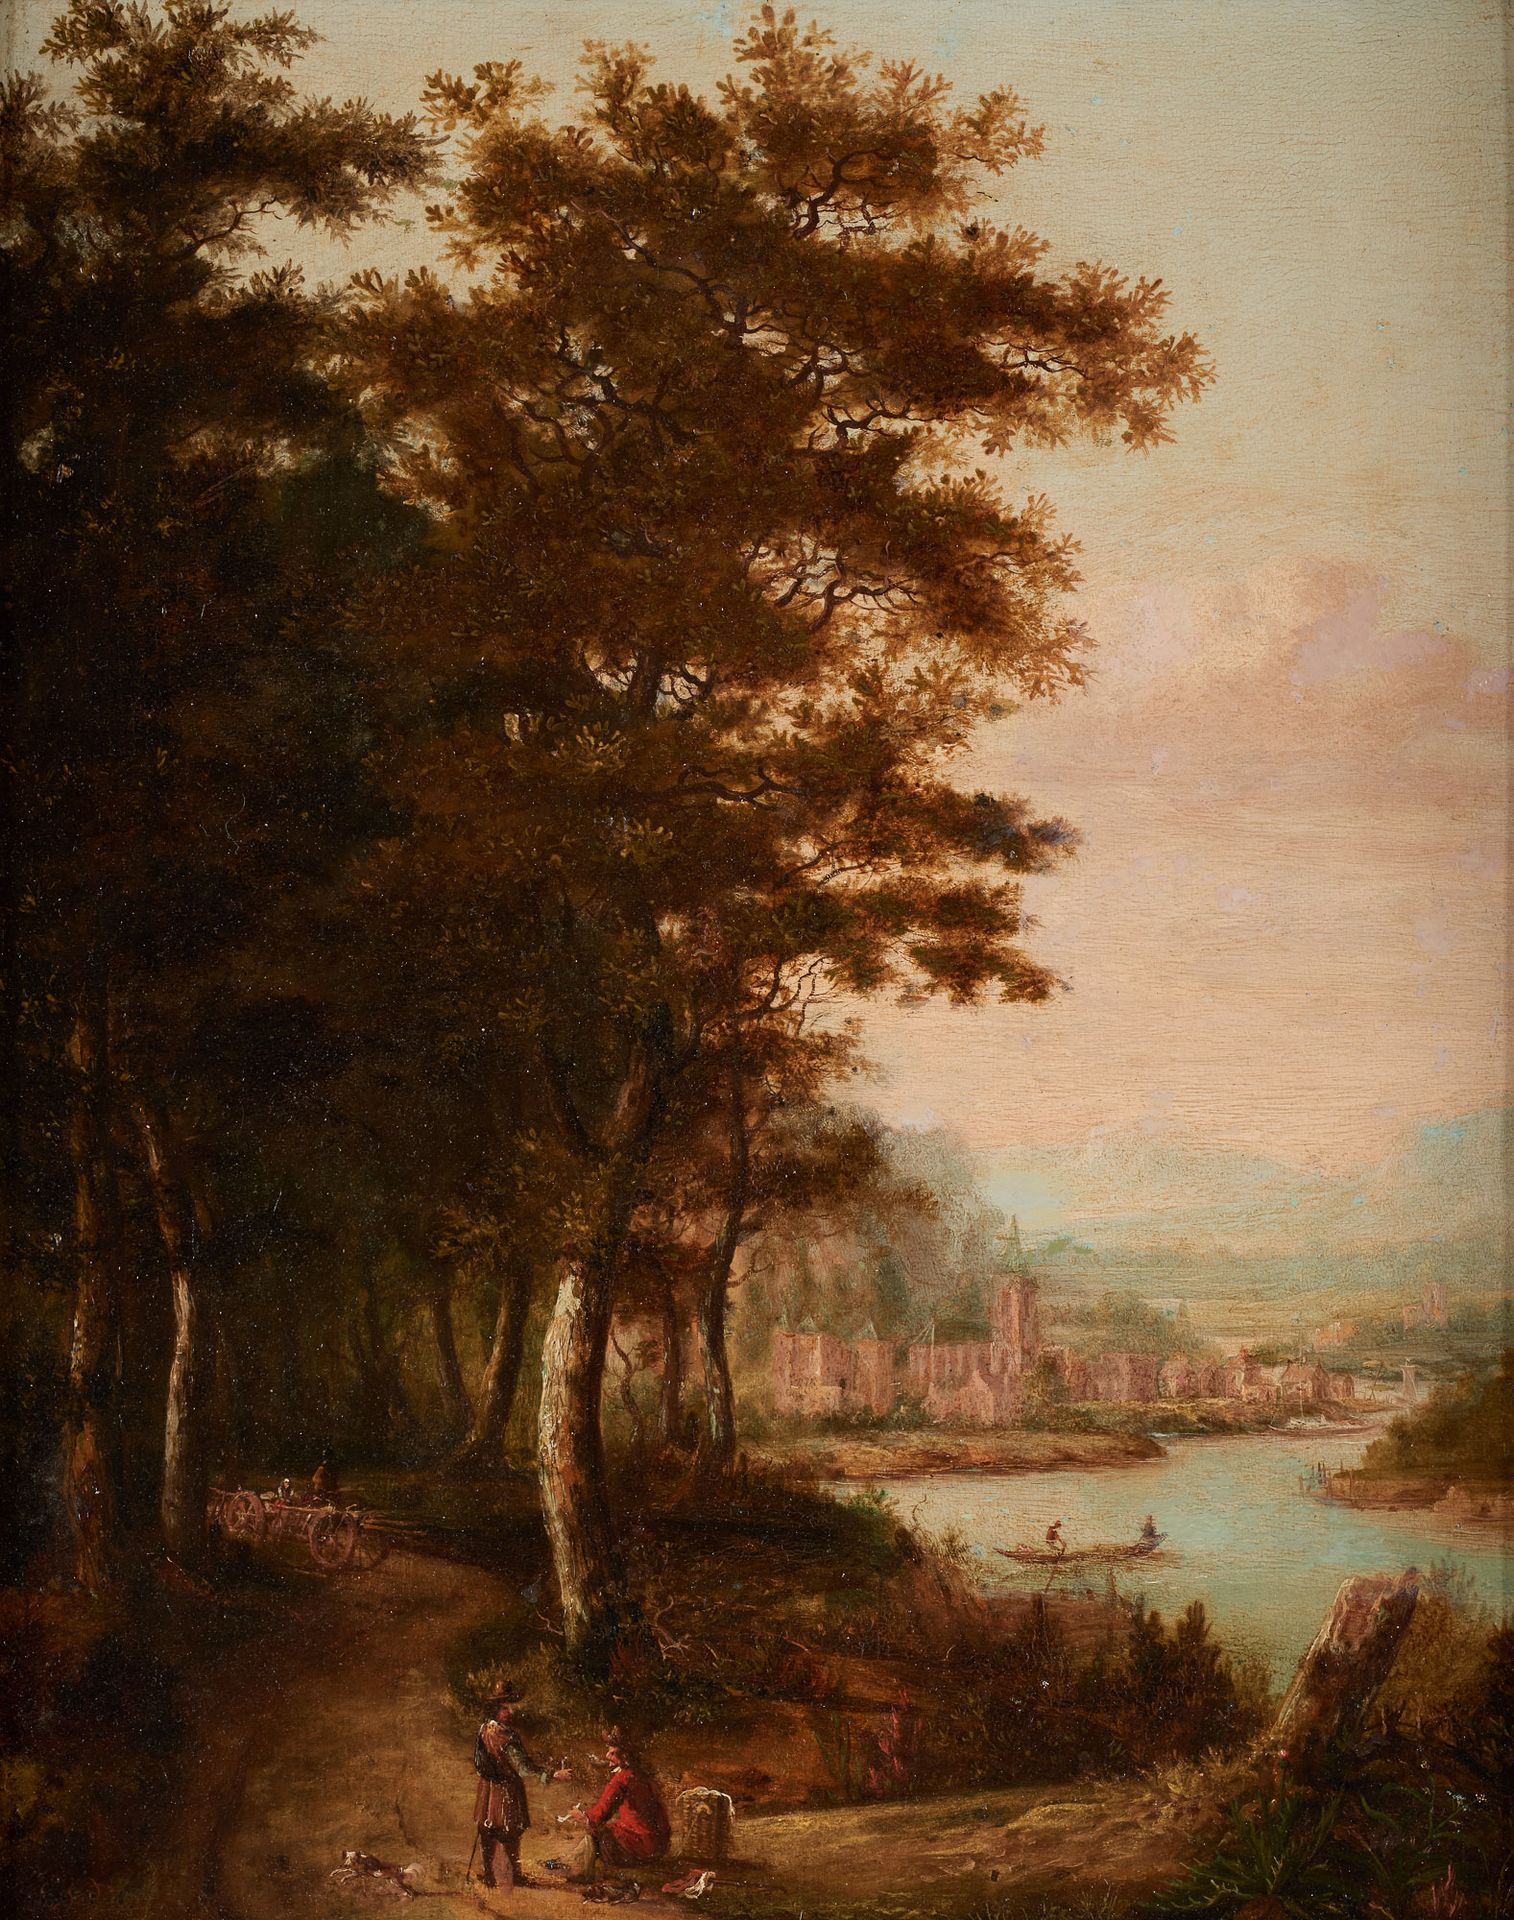 École flamande circa 1800. Oil on panel: Conversation by the river.

Monogrammed&hellip;